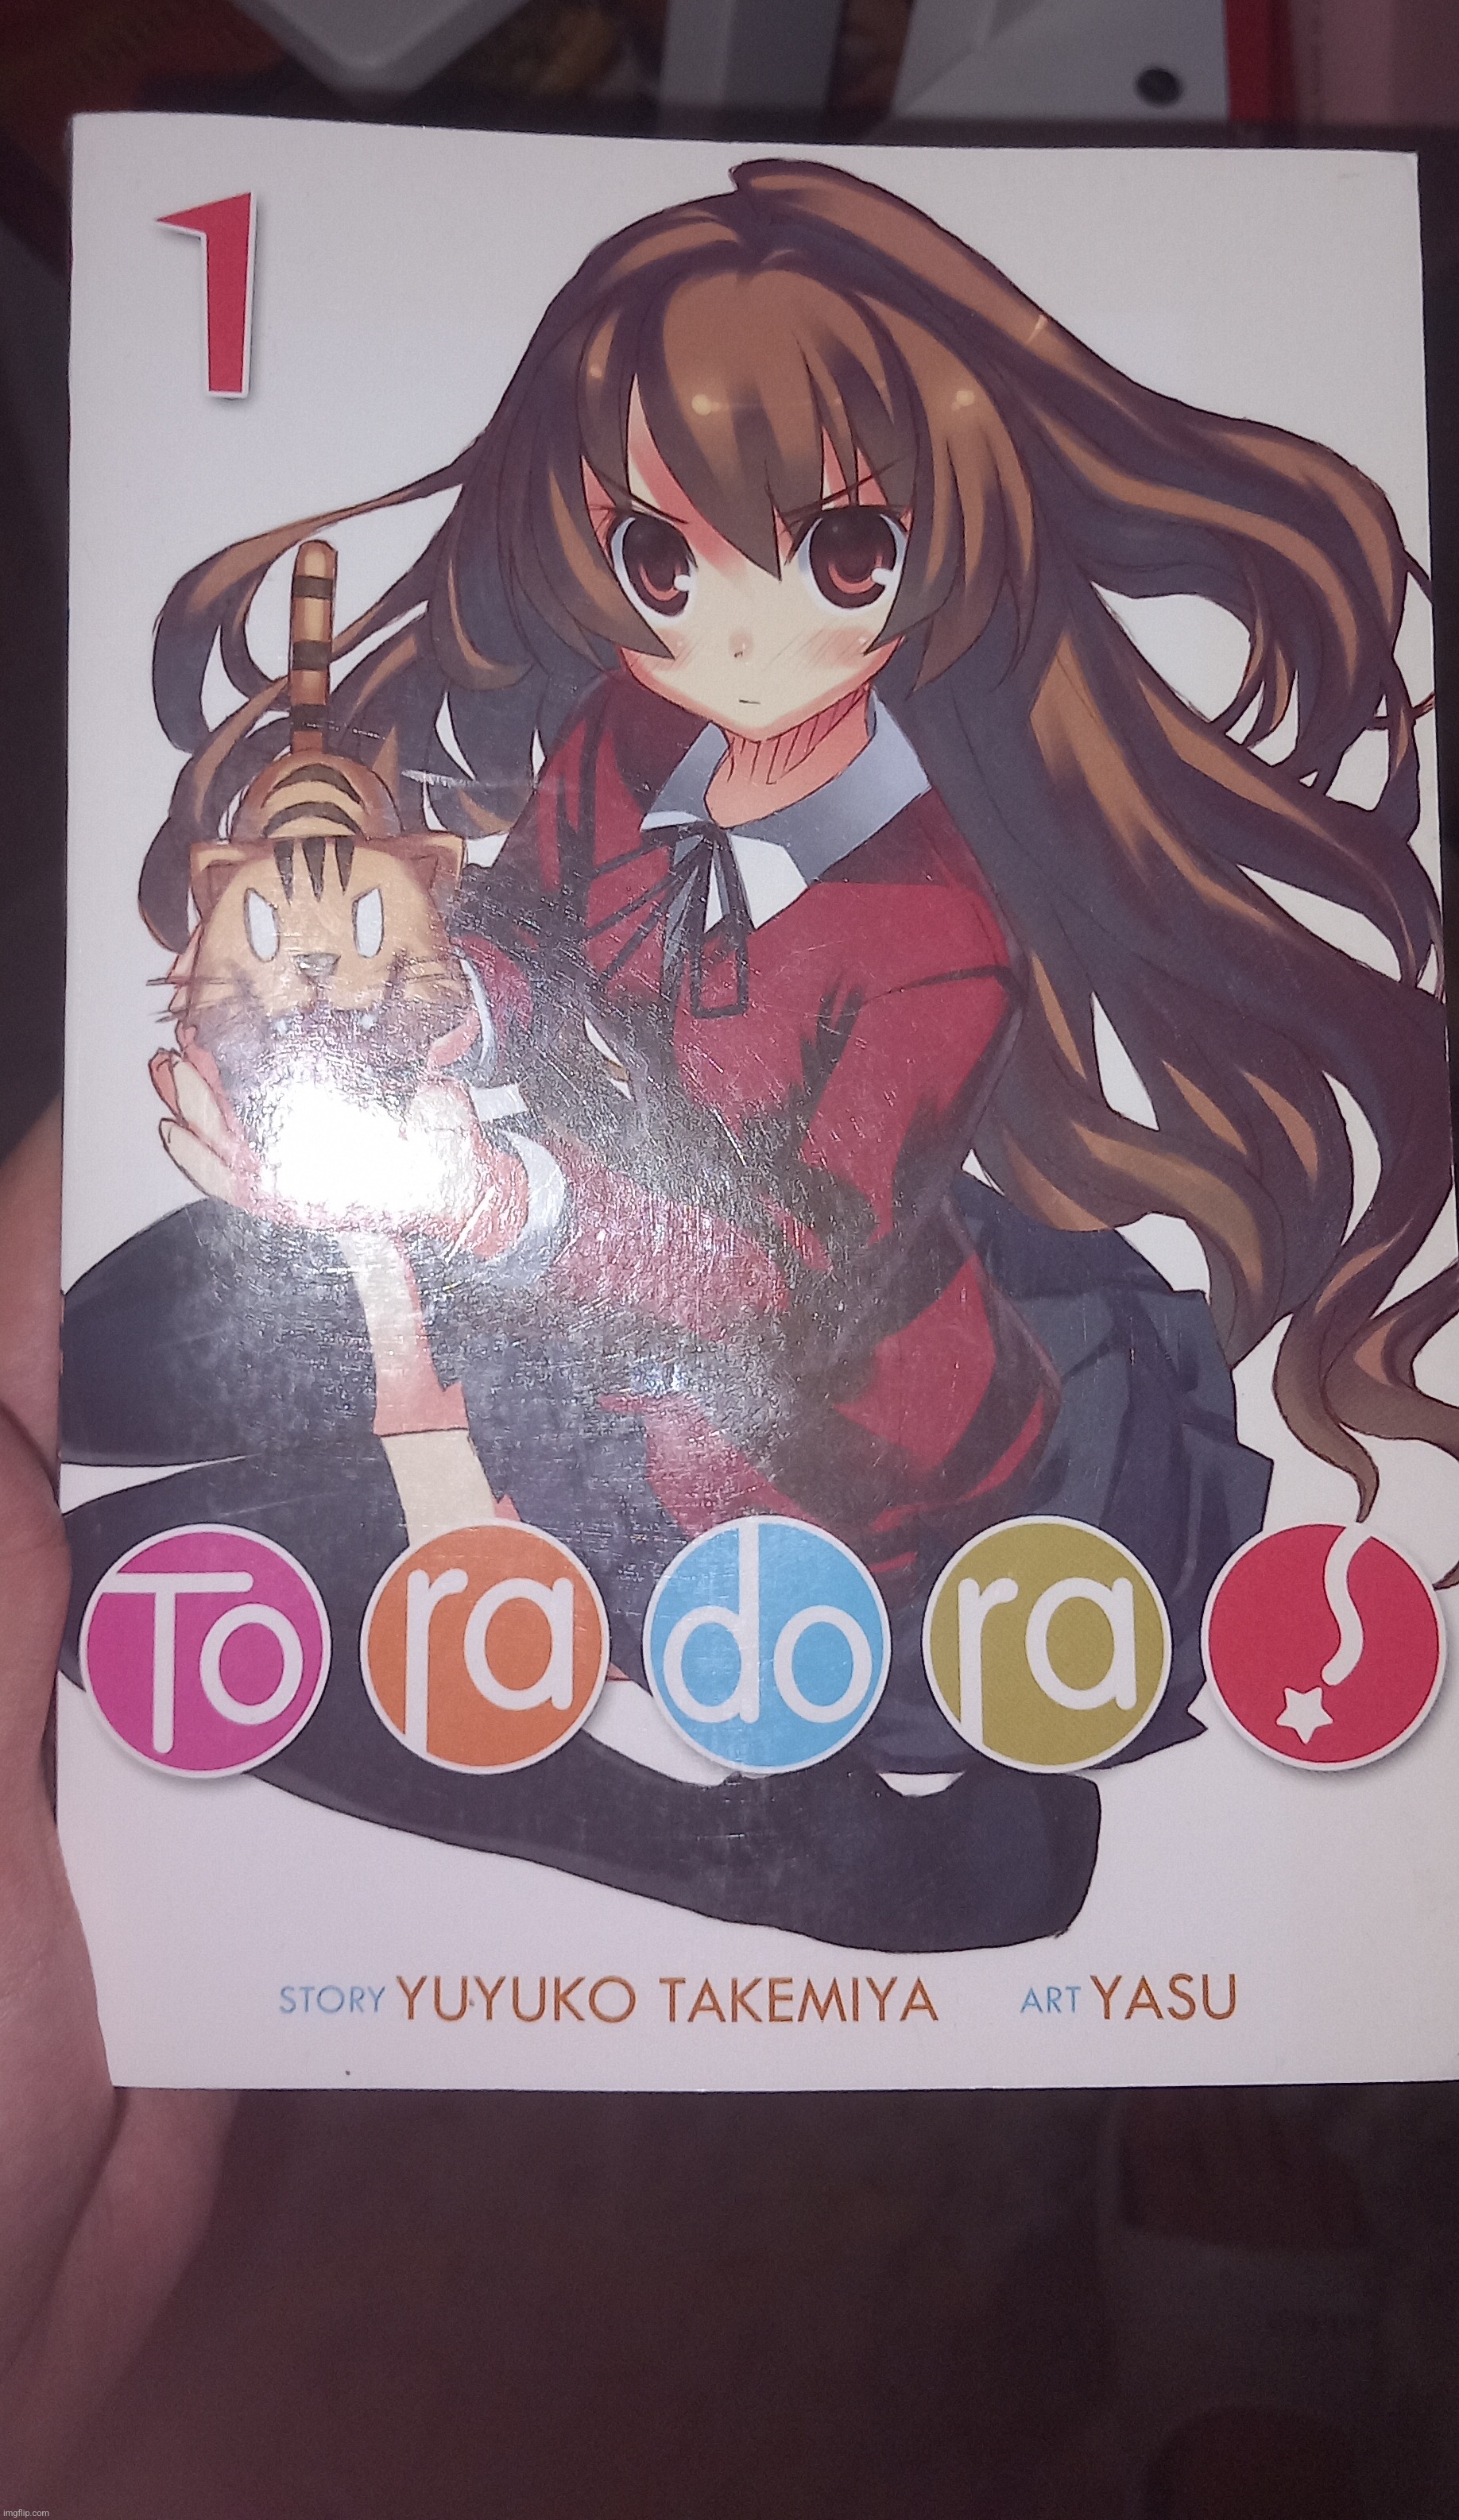 At vacation right now and look what I found at a hotel library (I had to read it or else Taiga would kill me): Toradora | image tagged in toradora | made w/ Imgflip meme maker